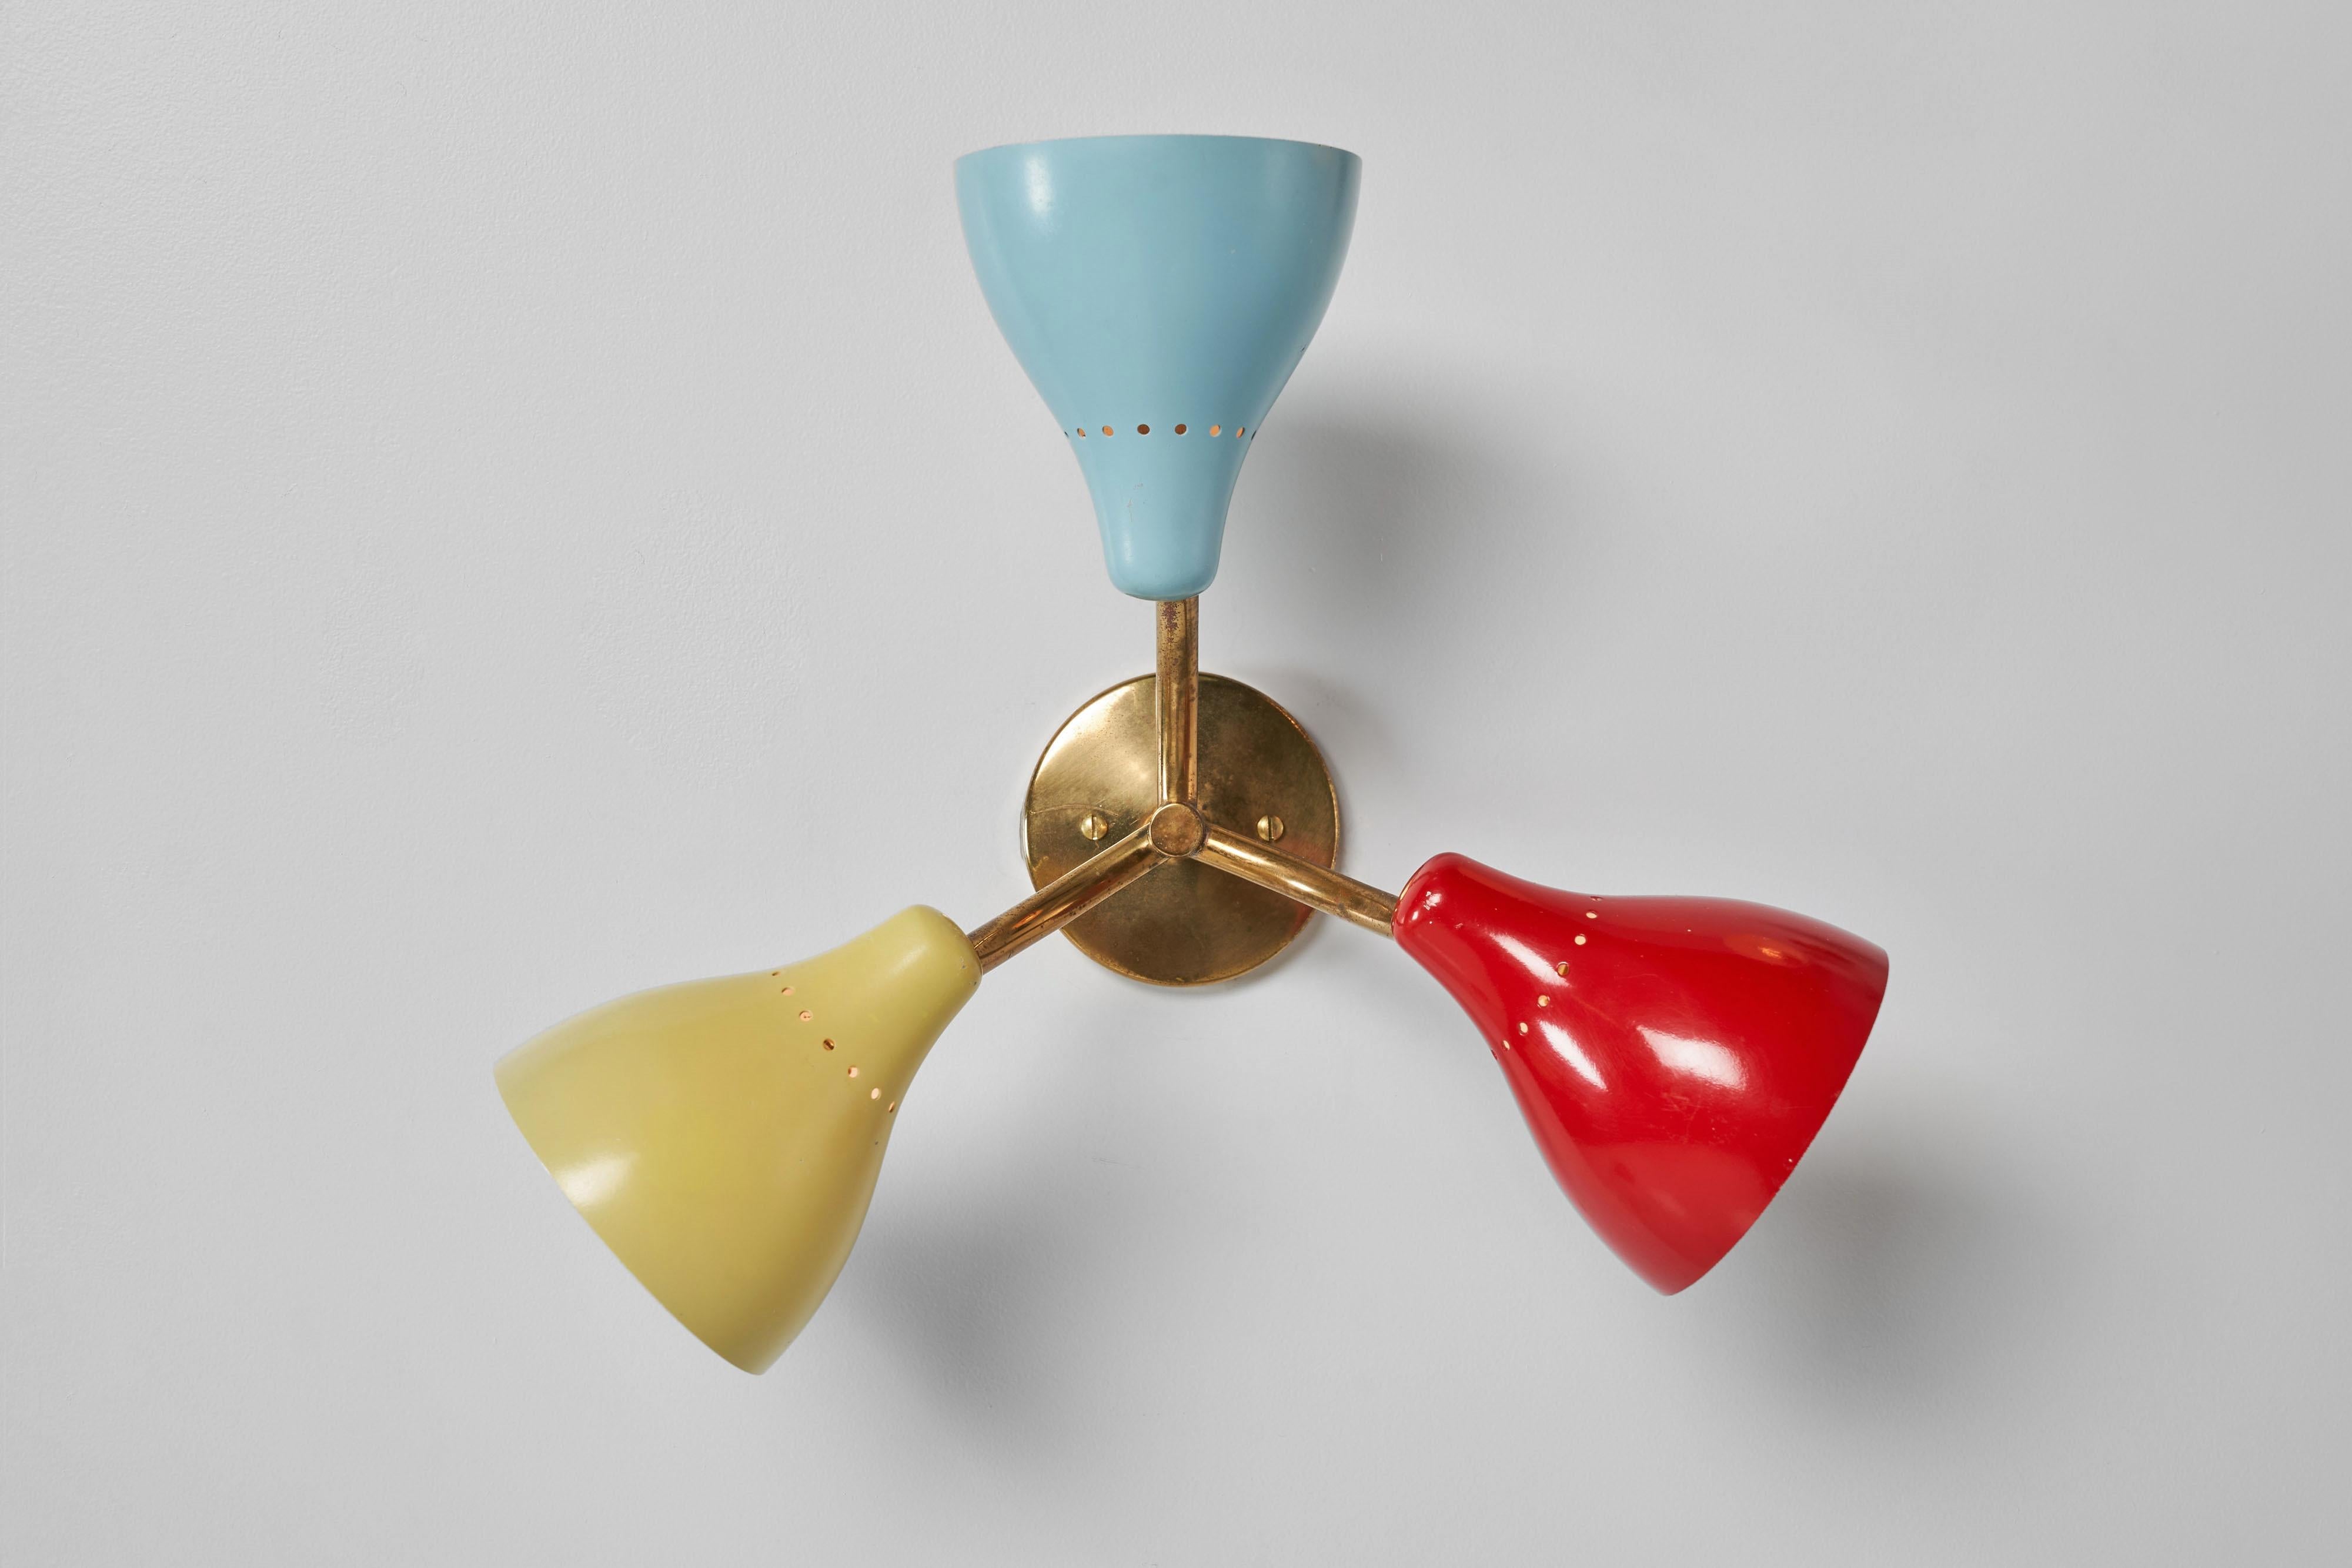 Playful Stilnovo triple shaded ceiling or wall lamps manufactured in Italy in 1950. You can use them as wall or ceiling lights, and the shades are adjustable, letting you control the light just the way you want. The lamps have brass arms and